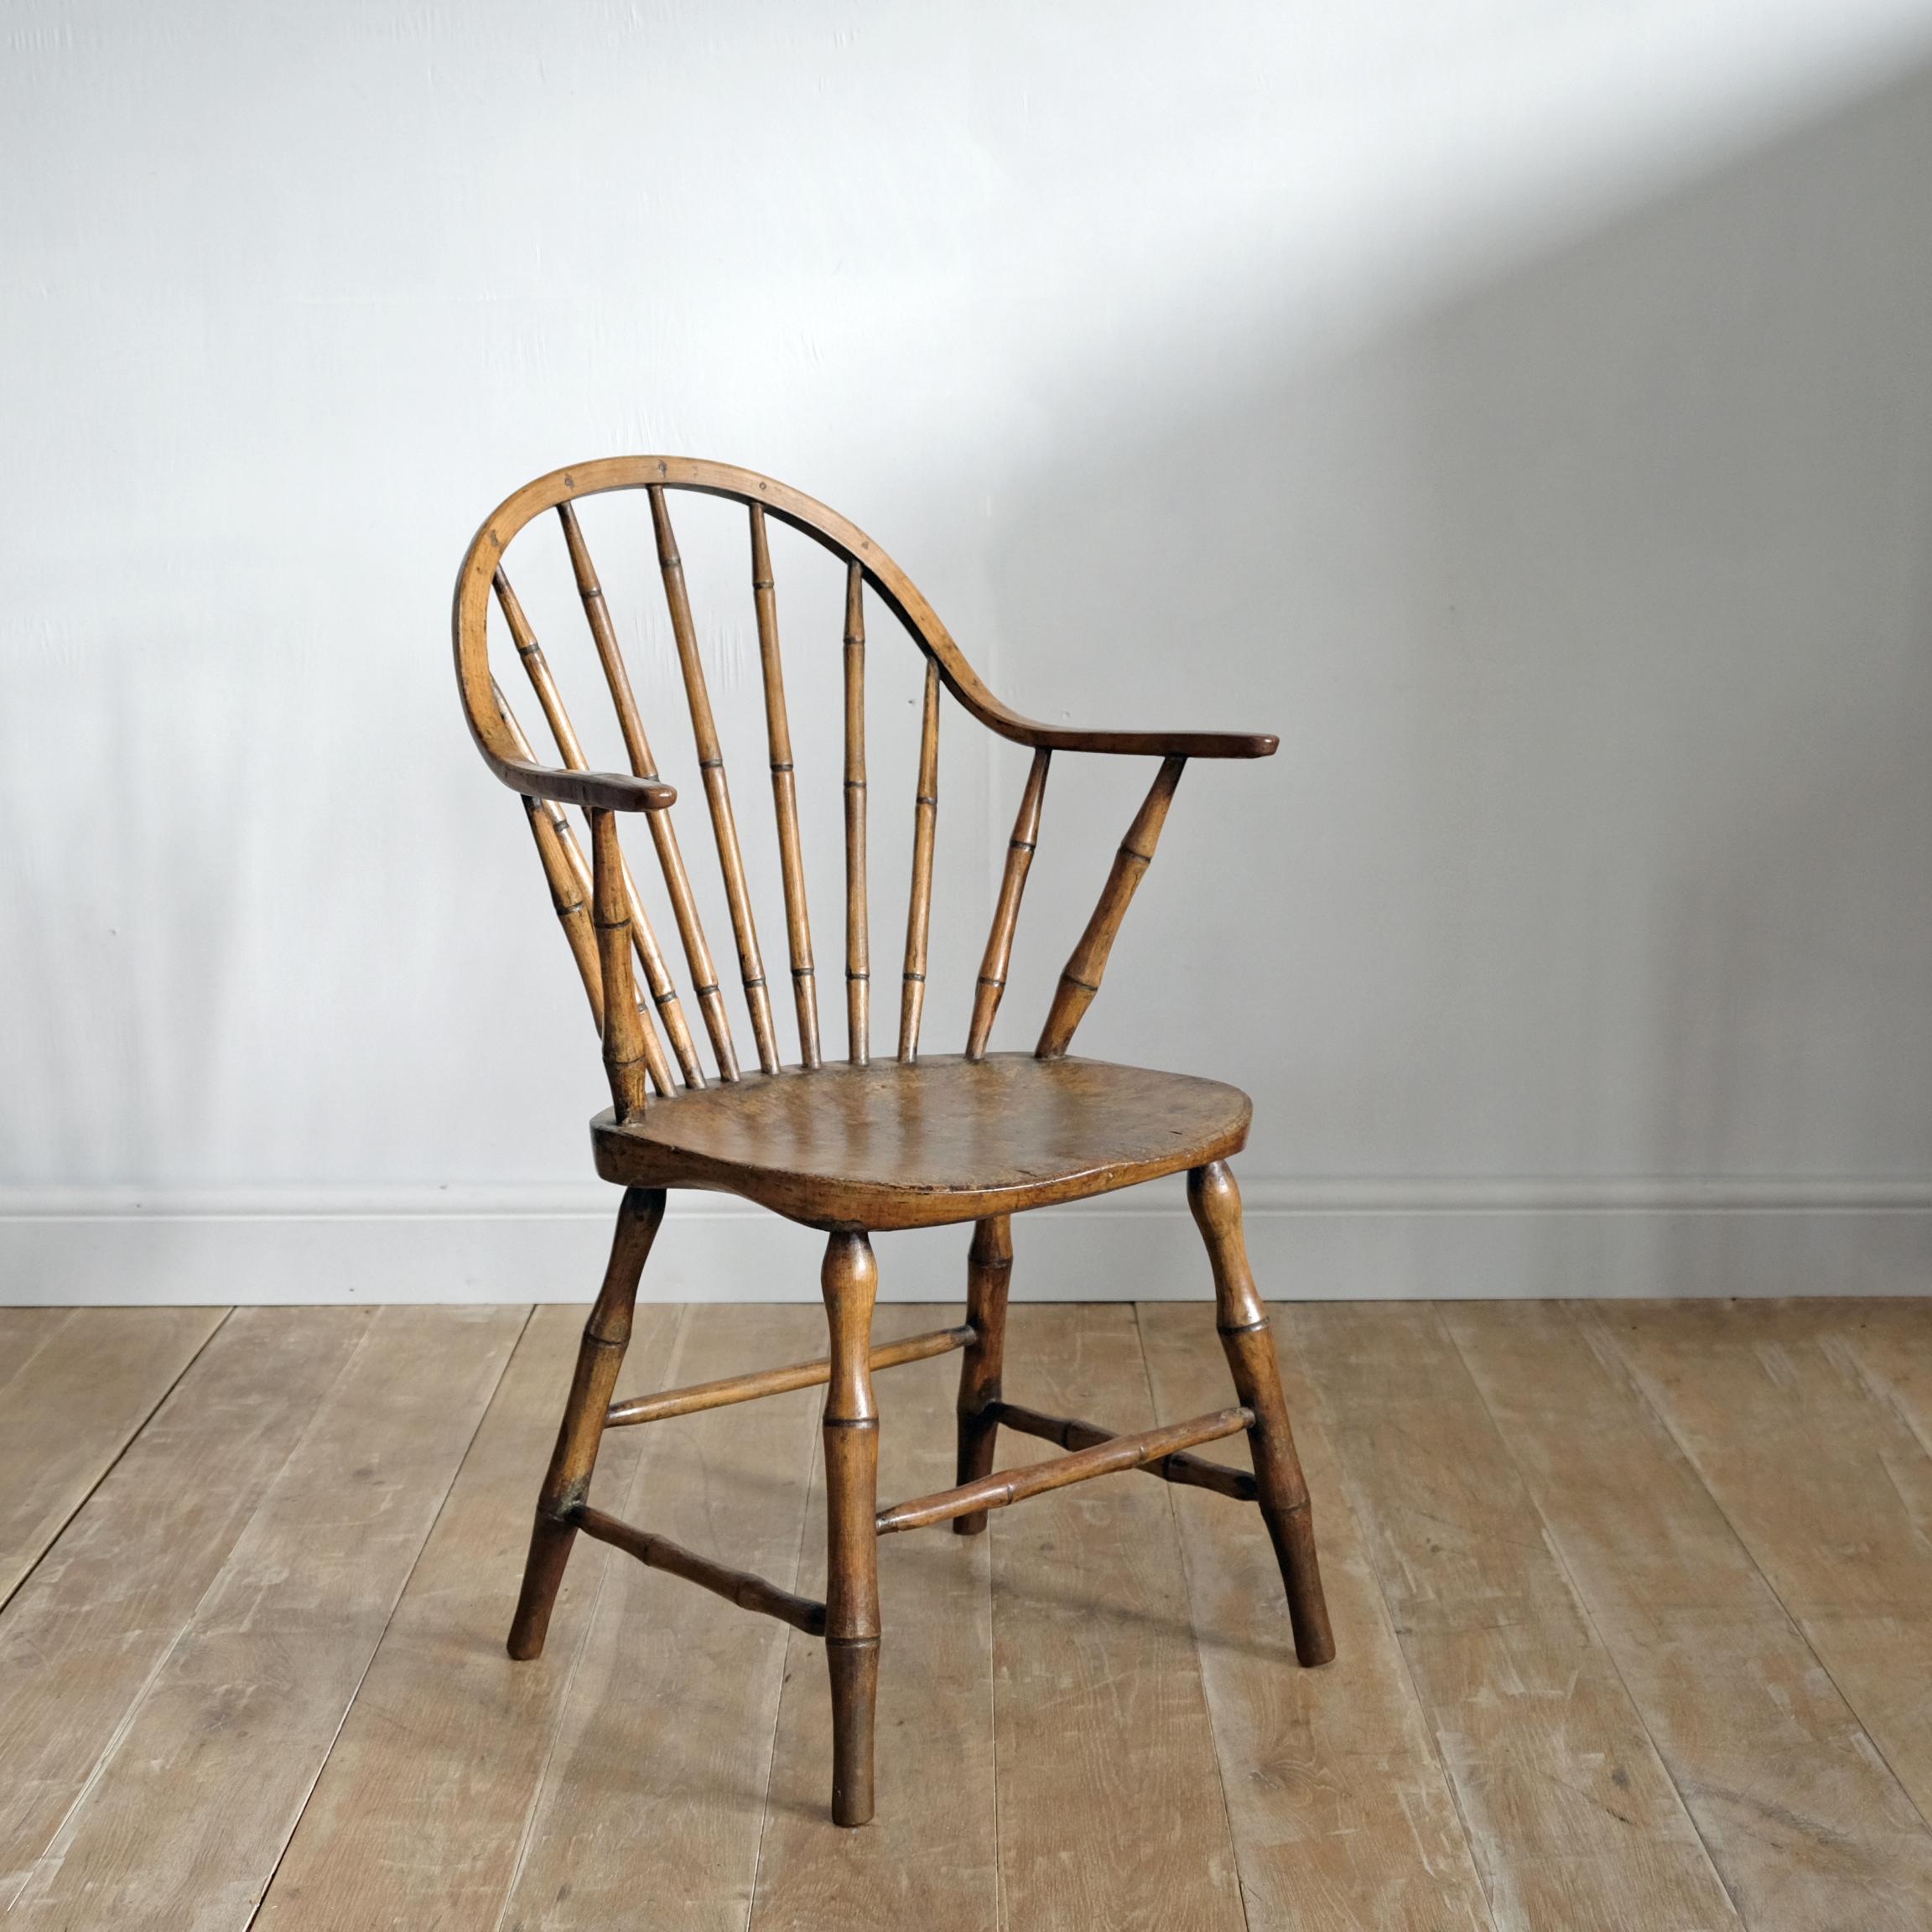 Country Continuous Arm Yealmpton Windsor Chair, English, Armchair, Original Paint, 1820s